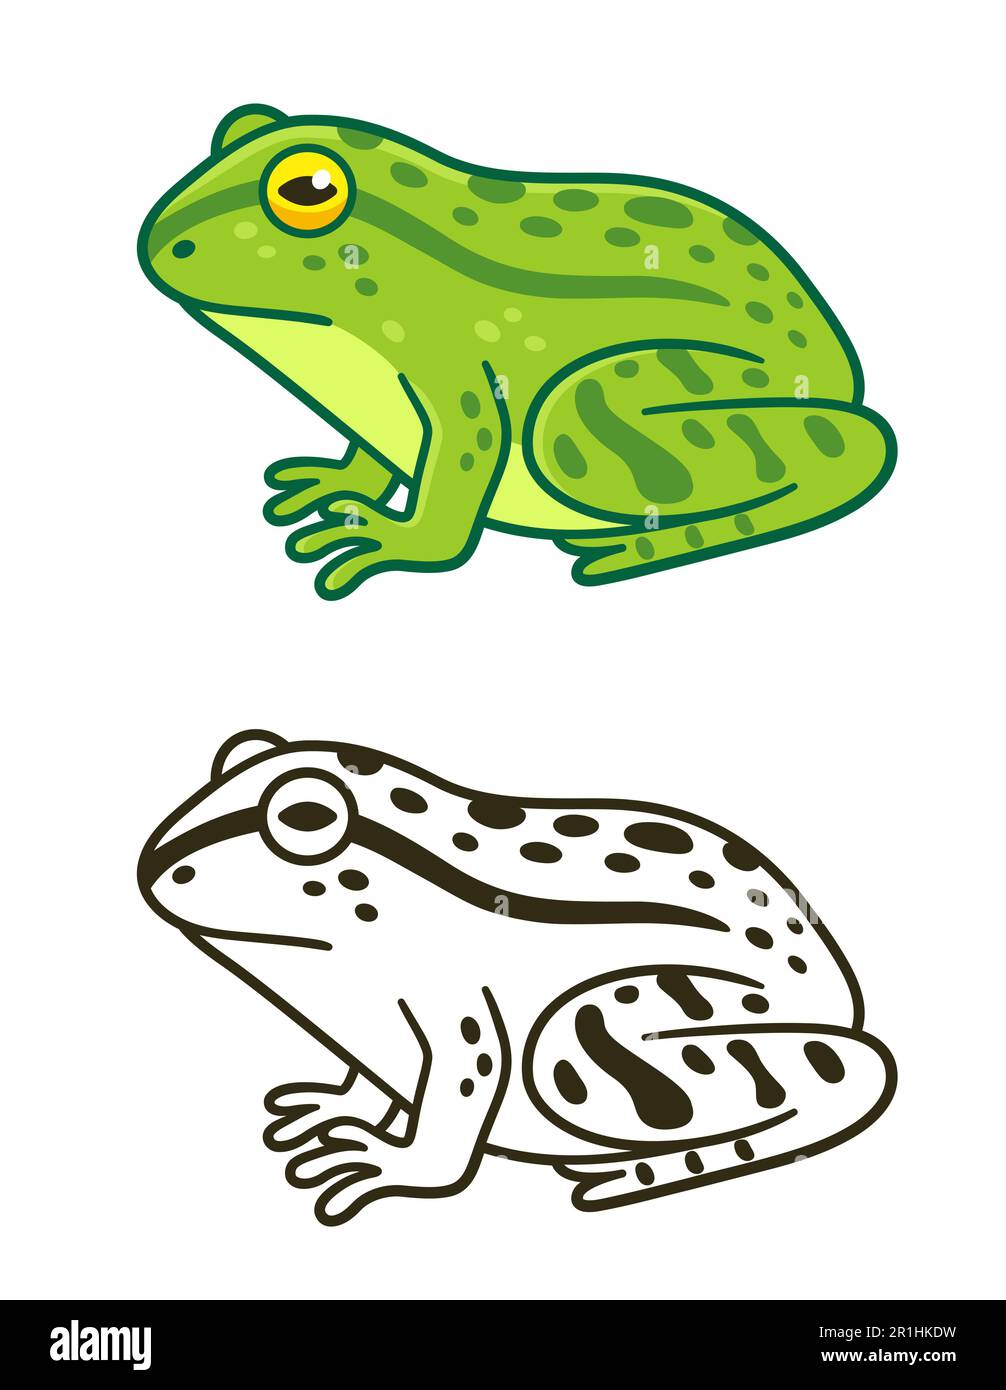 Green black frog Stock Vector Images - Alamy